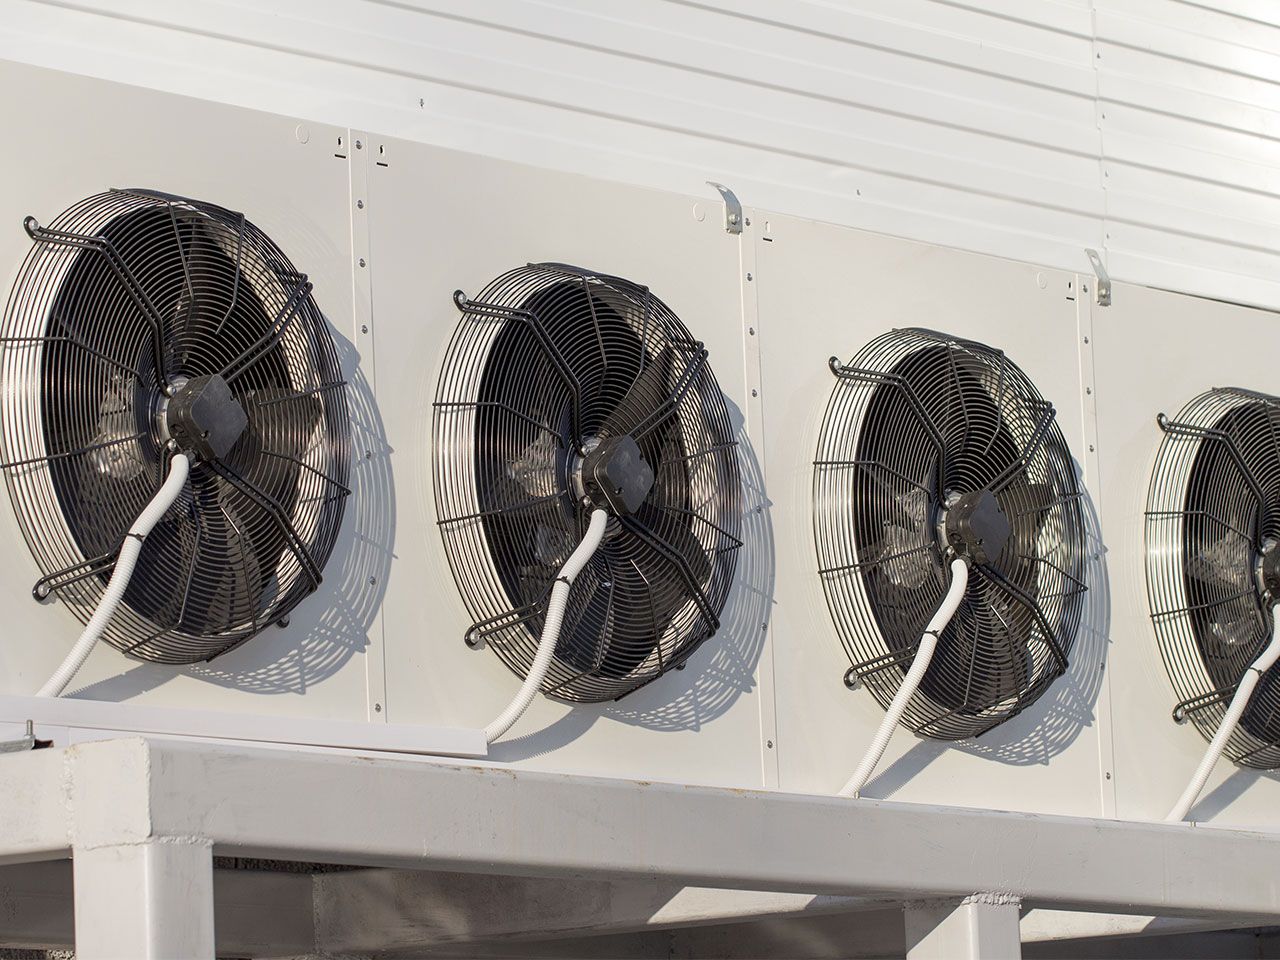 Let the Experts at Cockrum Heating & Cooling Repair Your Refrigeration in Columbia, MO.